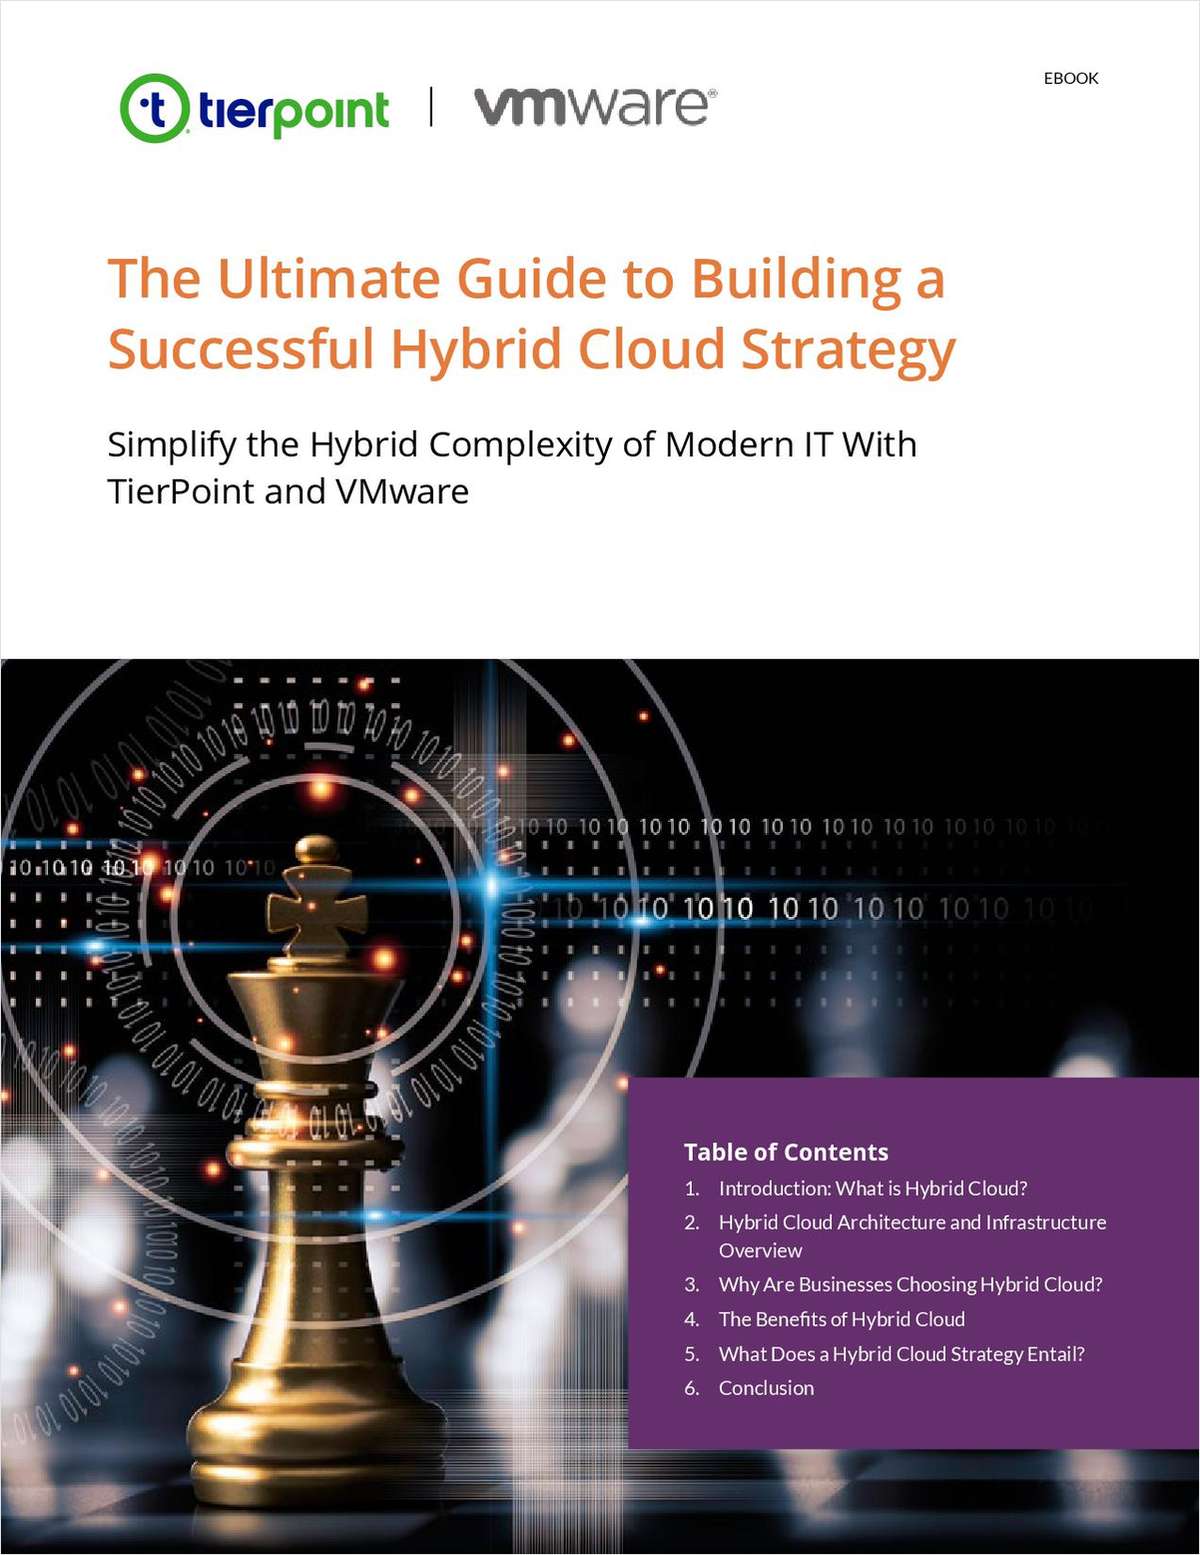 The Ultimate Guide to Building a Successful Hybrid Cloud Strategy